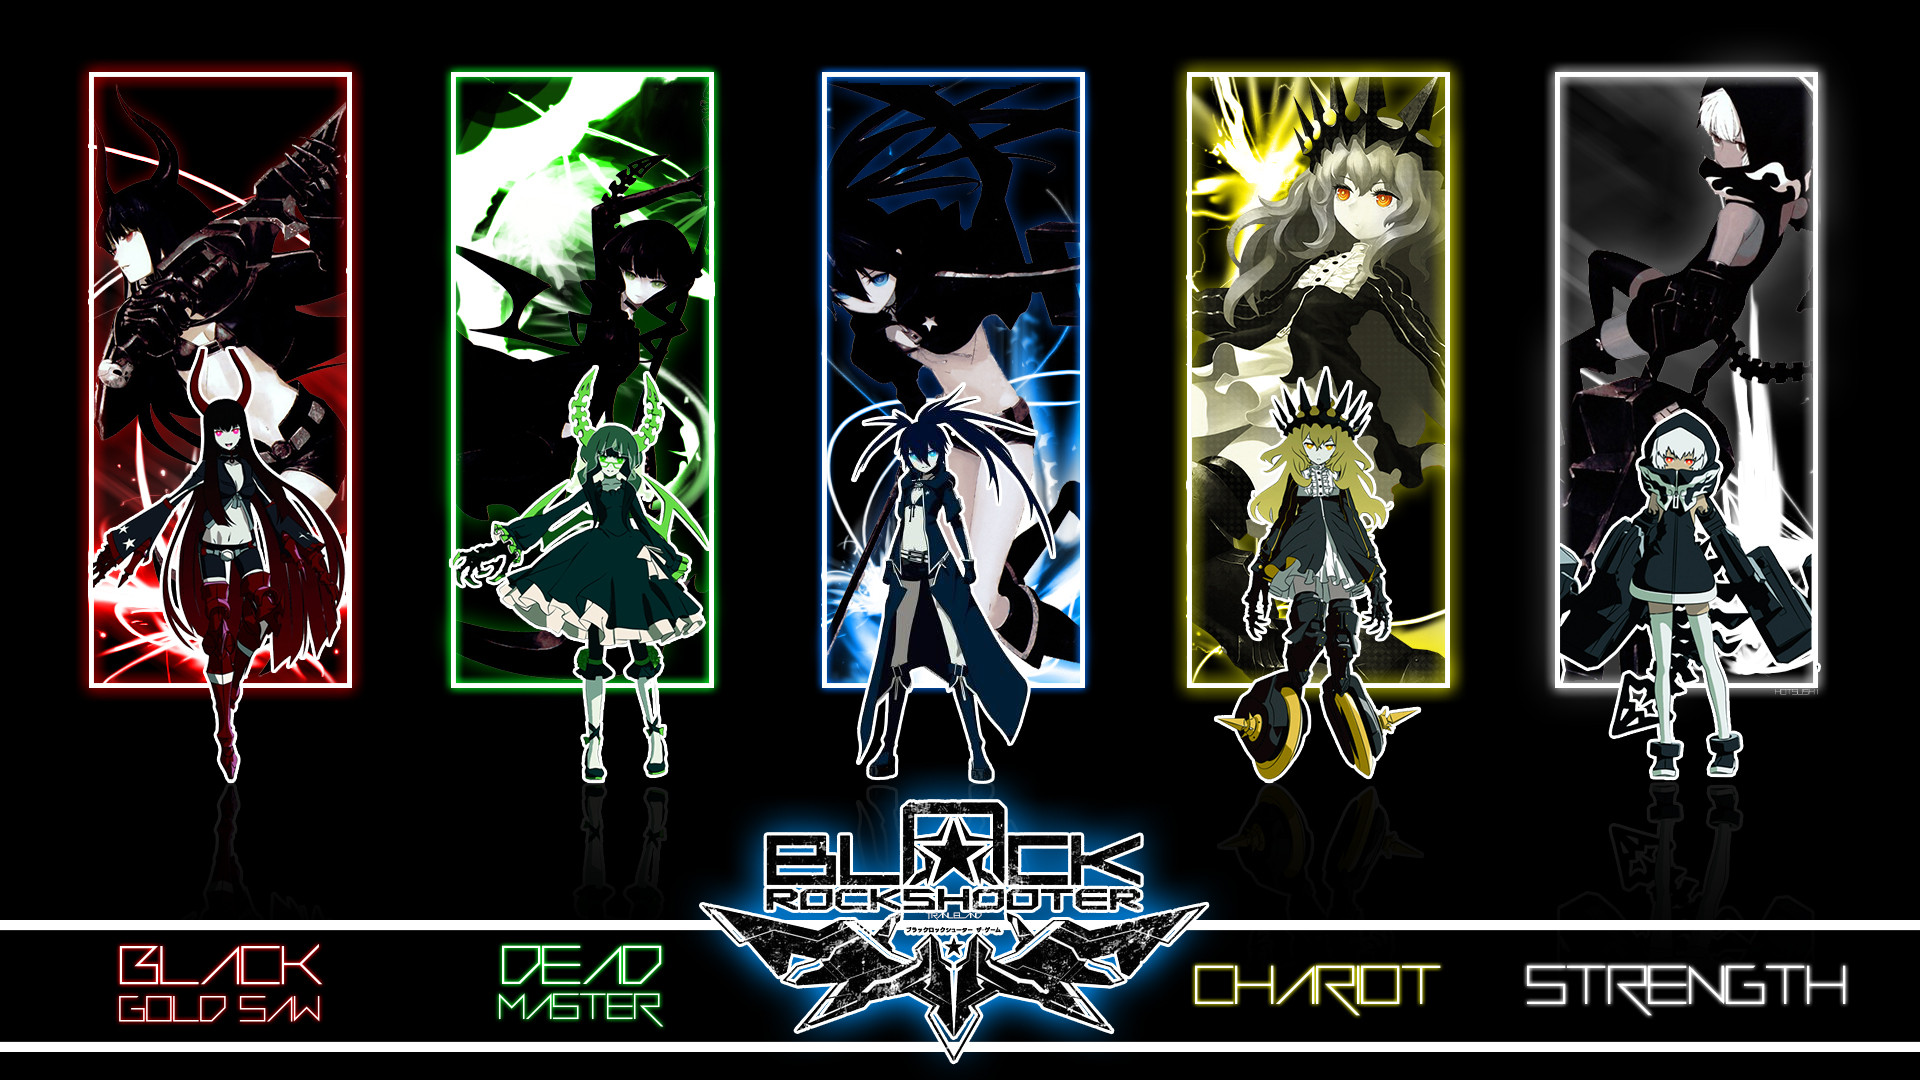 Chariot (Black Rock Shooter) HD Smartphone Background